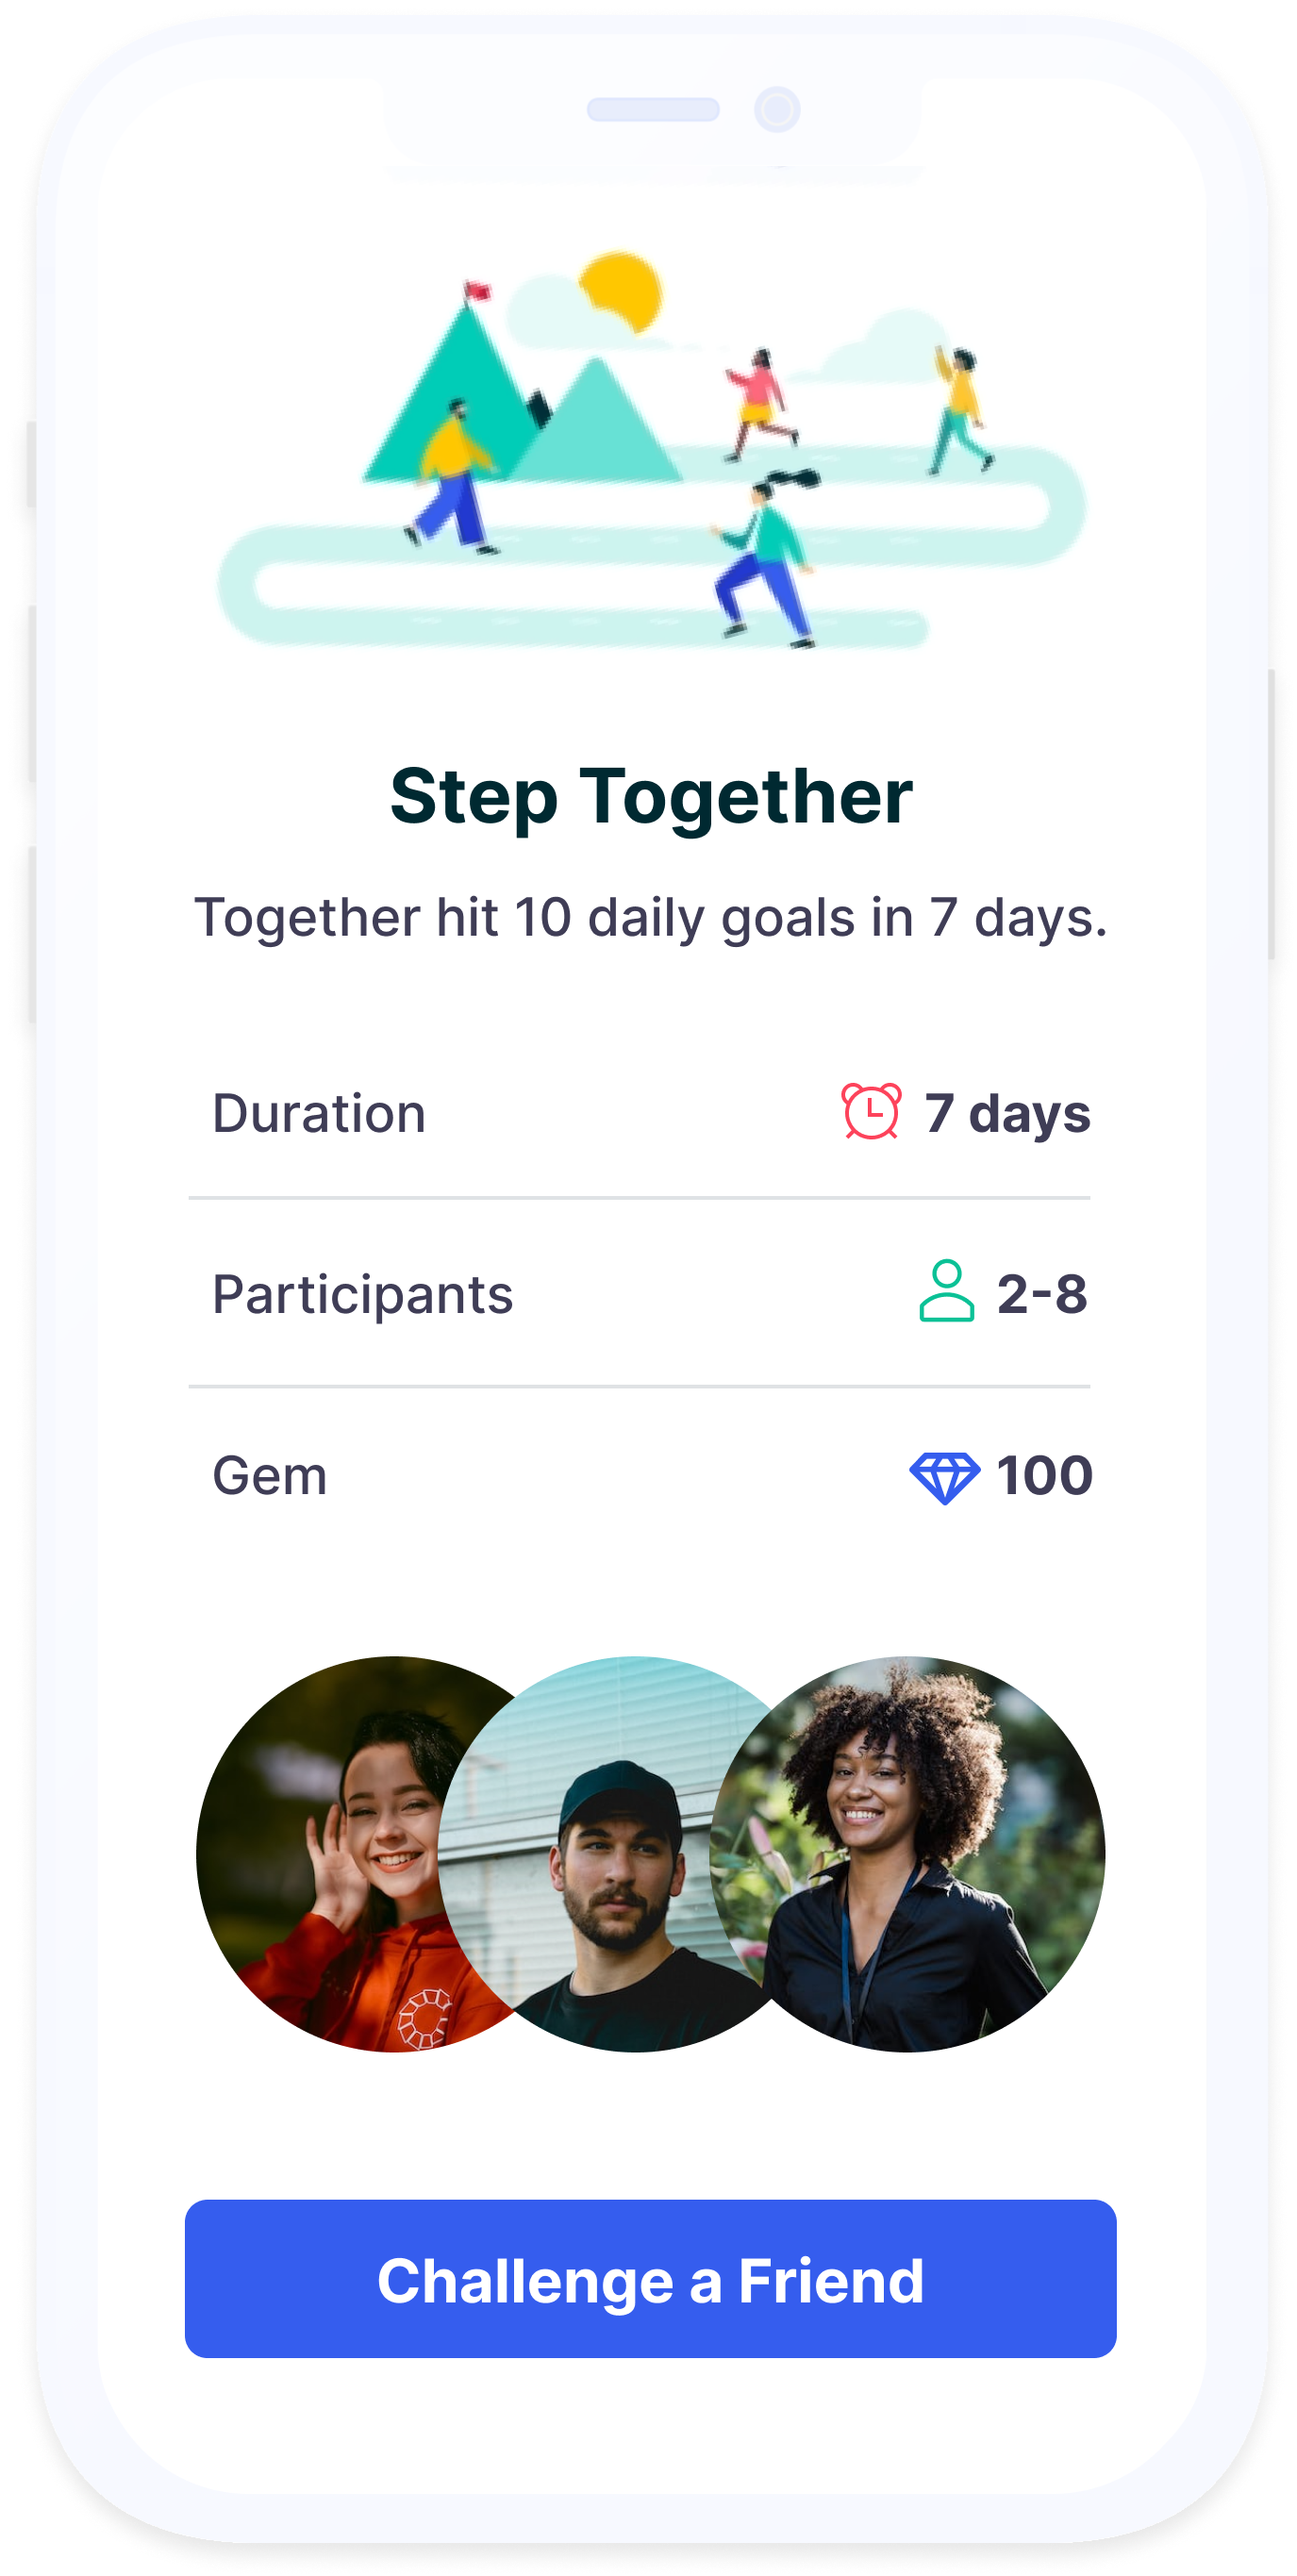 Optimity app users can challenge friends or colleagues to hit their daily step goals together for bonus points, acting as accountability partners to one another